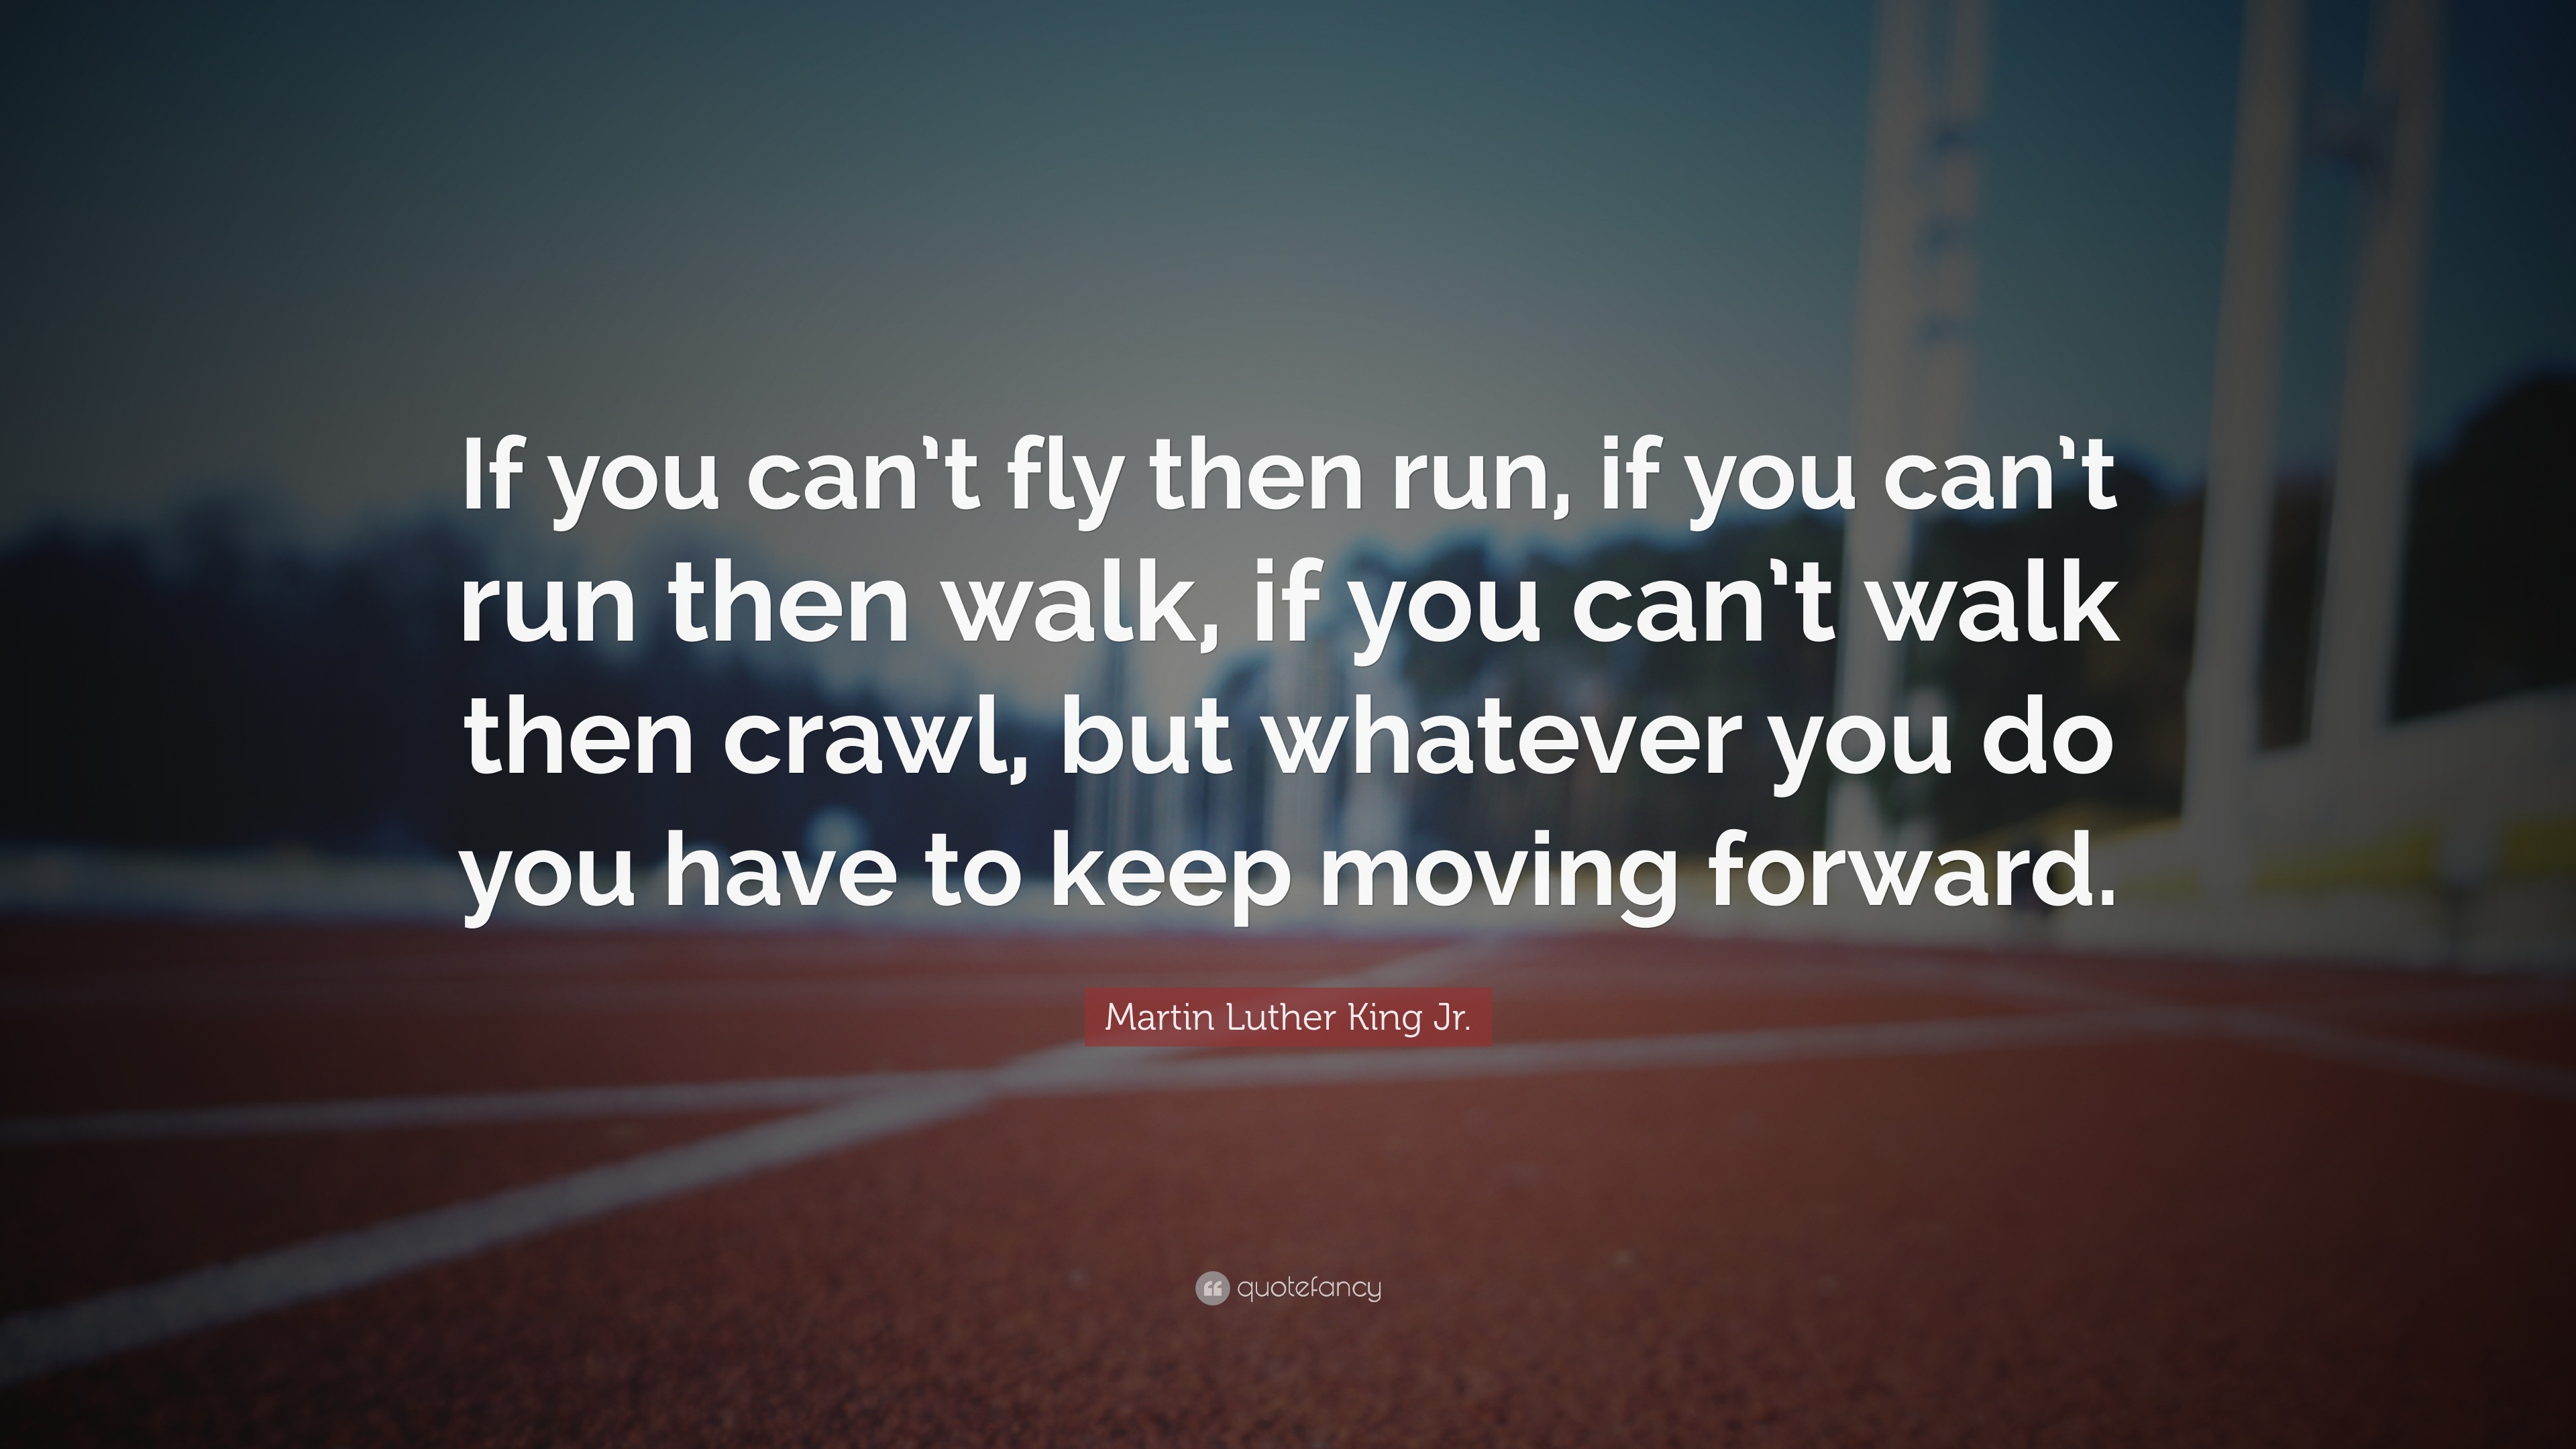 Martin Luther King Jr. Quote: "If you can't fly then run ...